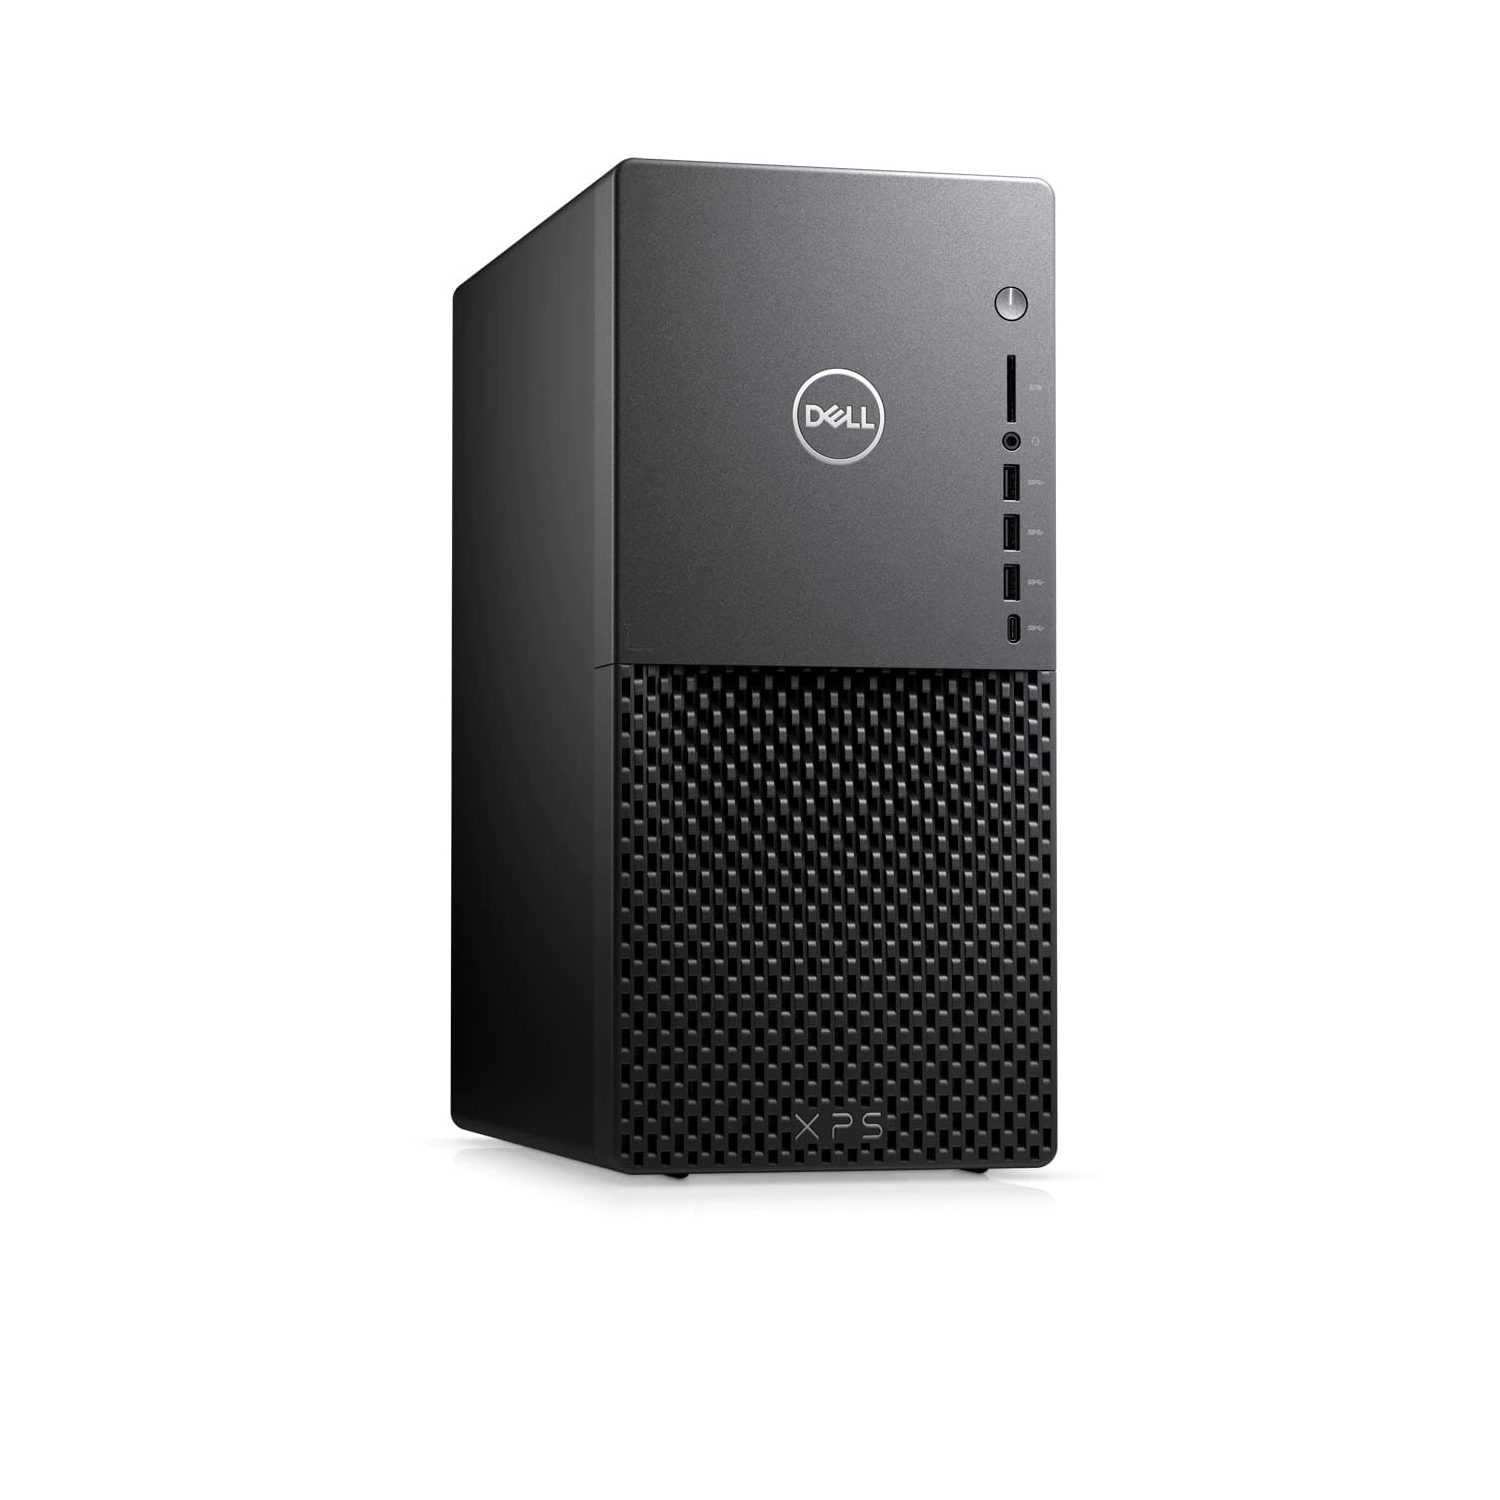 Refurbished (Excellent) - Dell XPS 8940 Desktop (2020) | Core i5 - 1TB HDD + 256GB SSD - 32GB RAM - GTX 1660 | 6 Cores @ 4.3 GHz - 10th Gen CPU Certified Refurbished